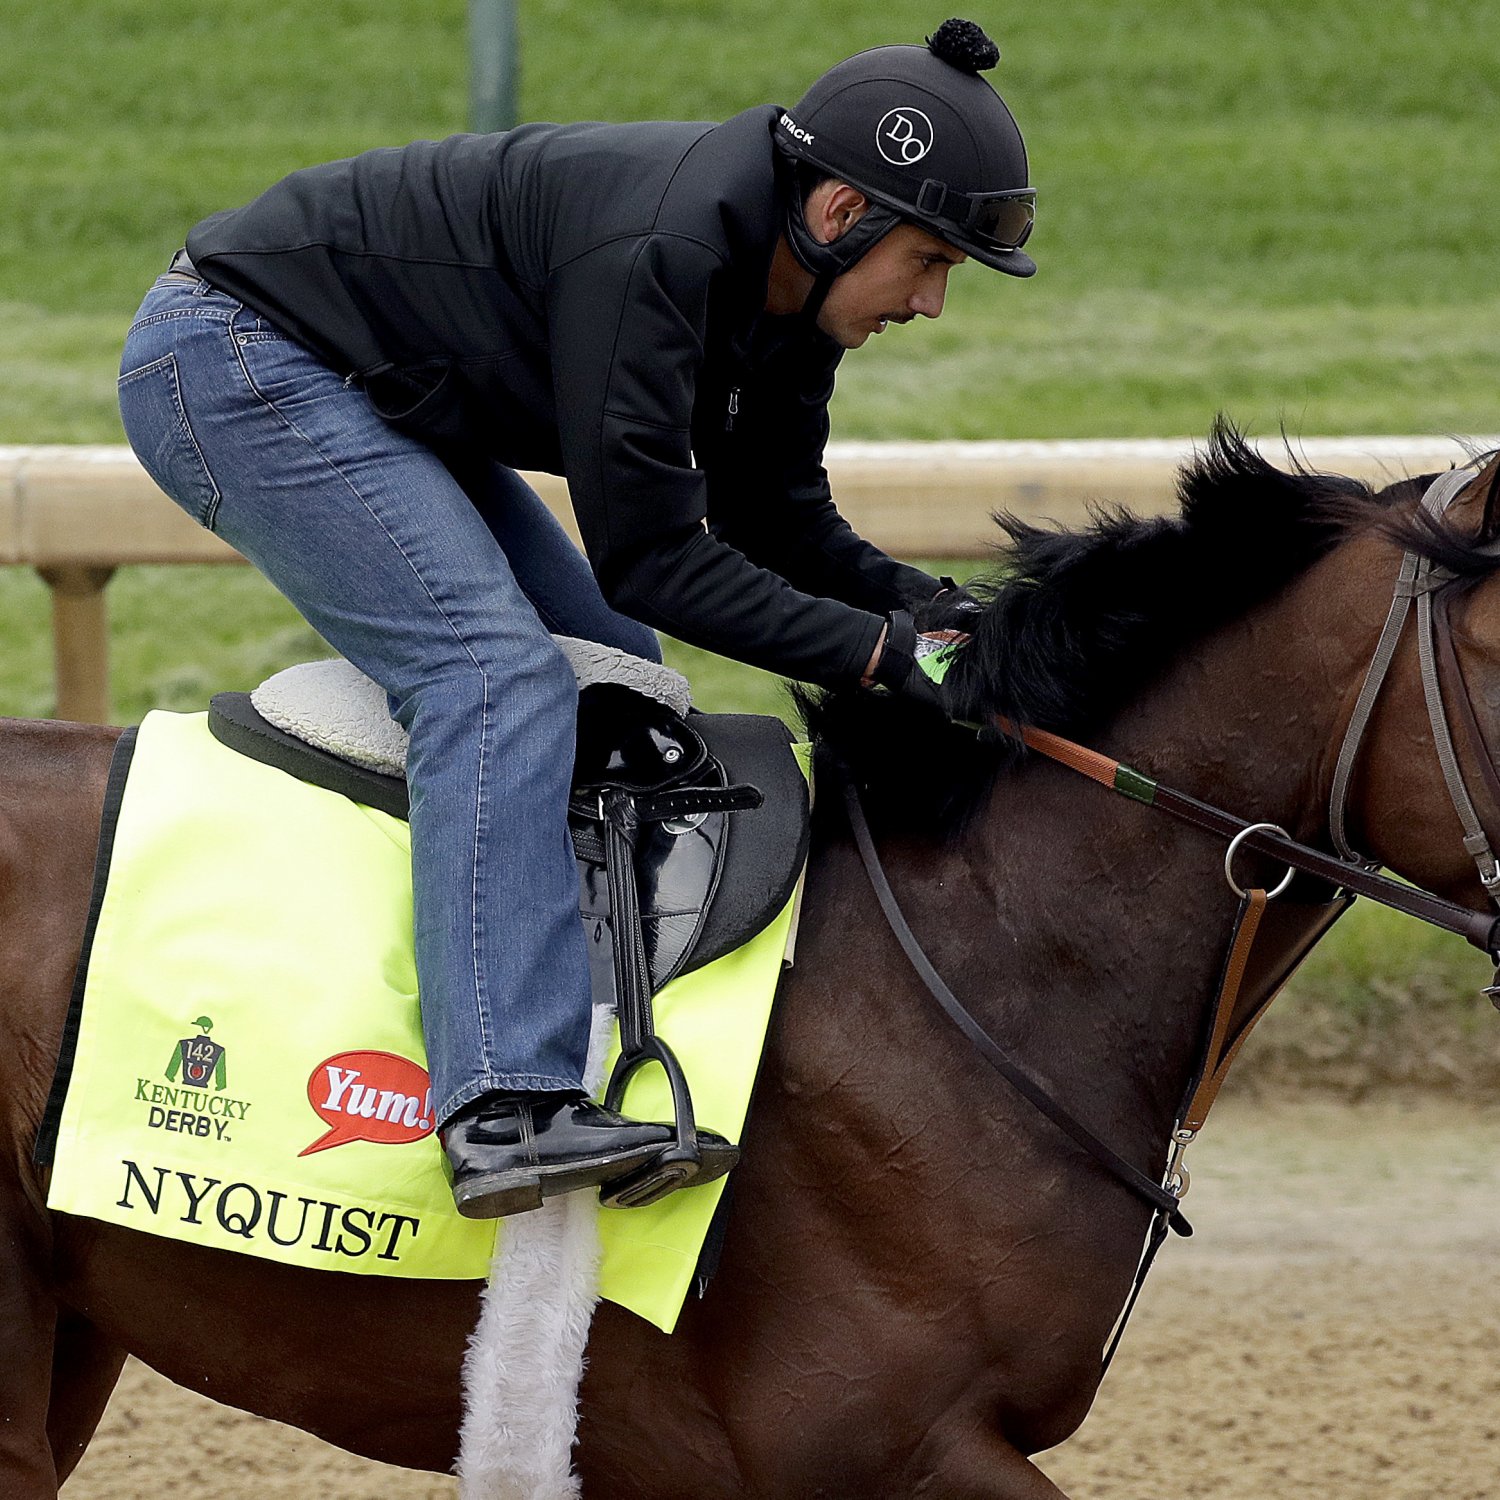 Kentucky Derby 2016 Contenders Odds, Jockey and Pedigree Info for Top